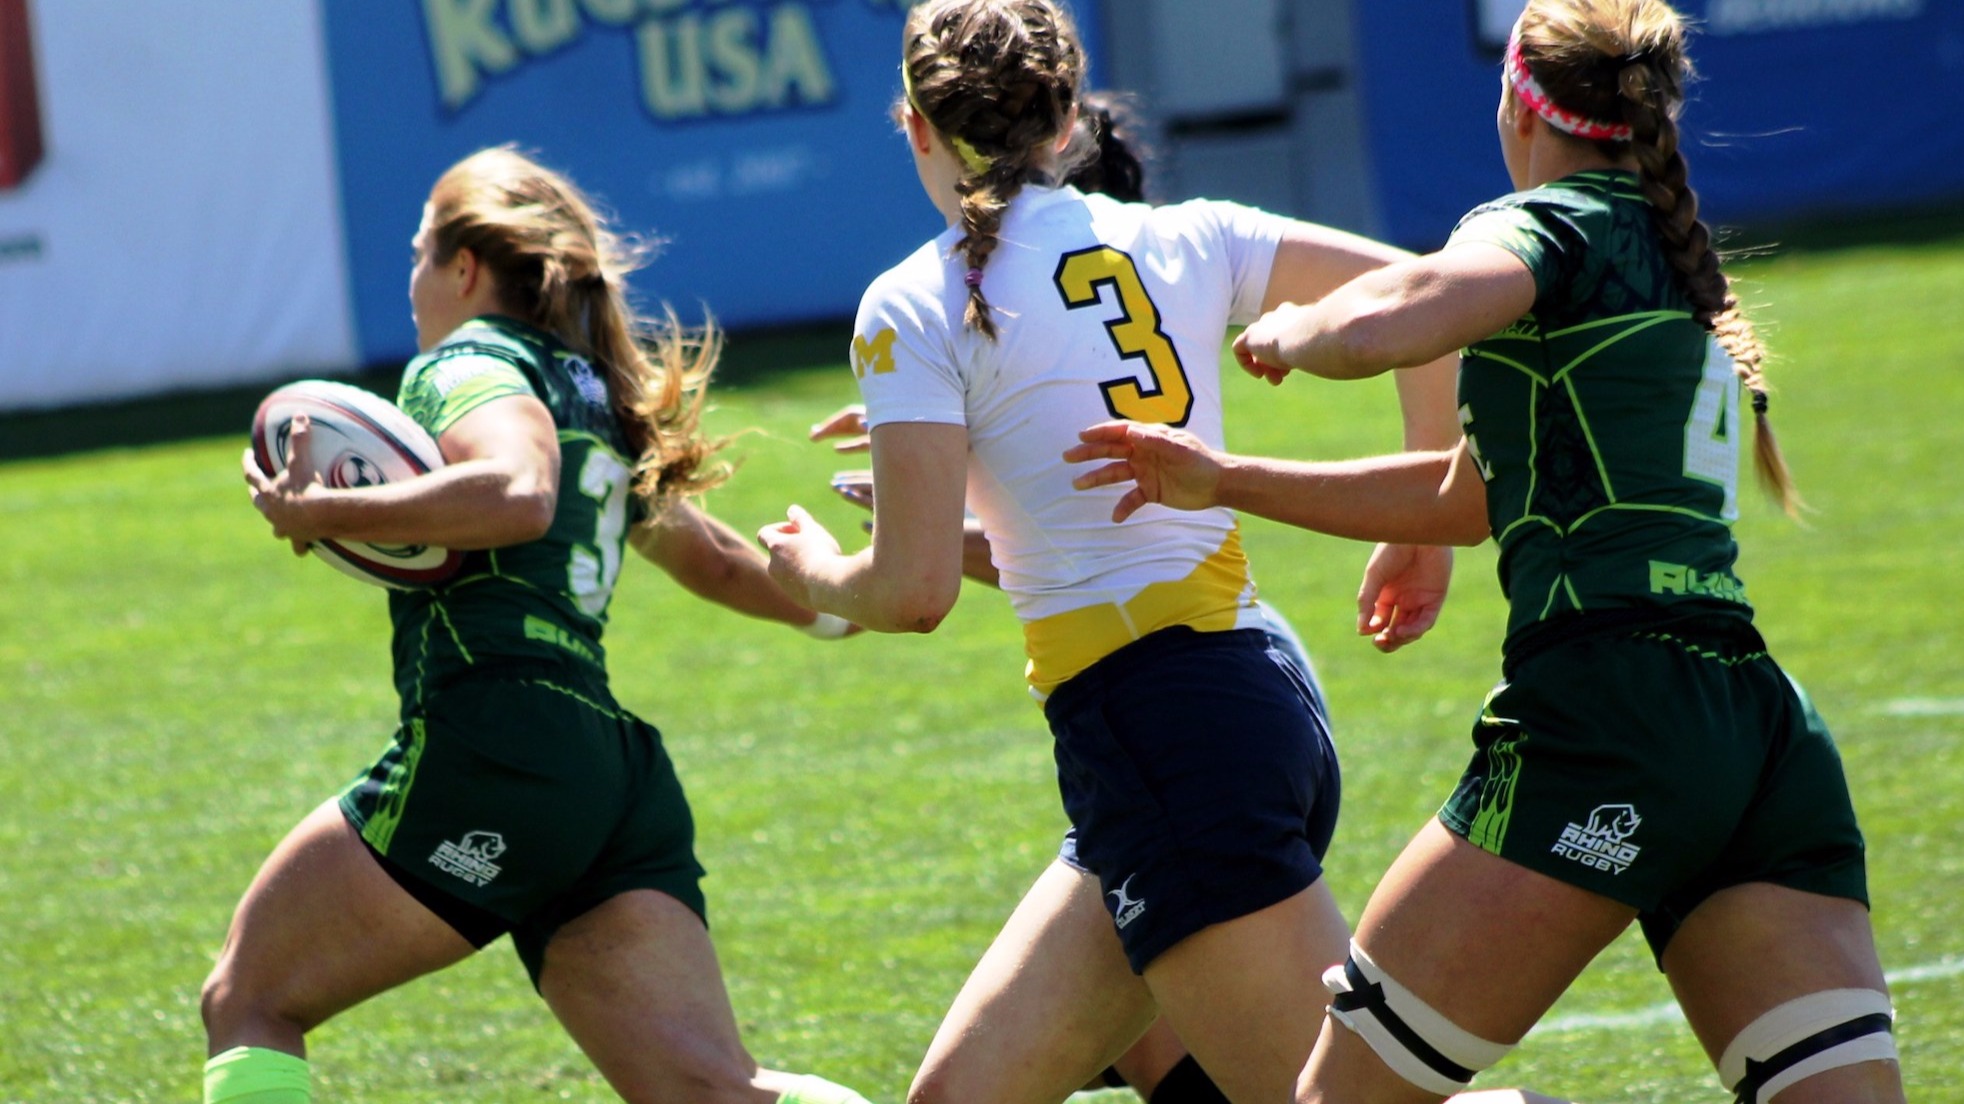 Life University's Karissa Lacy breaks through against Michigan in the women's 7s championships May 21. Ary Shoppe photo.